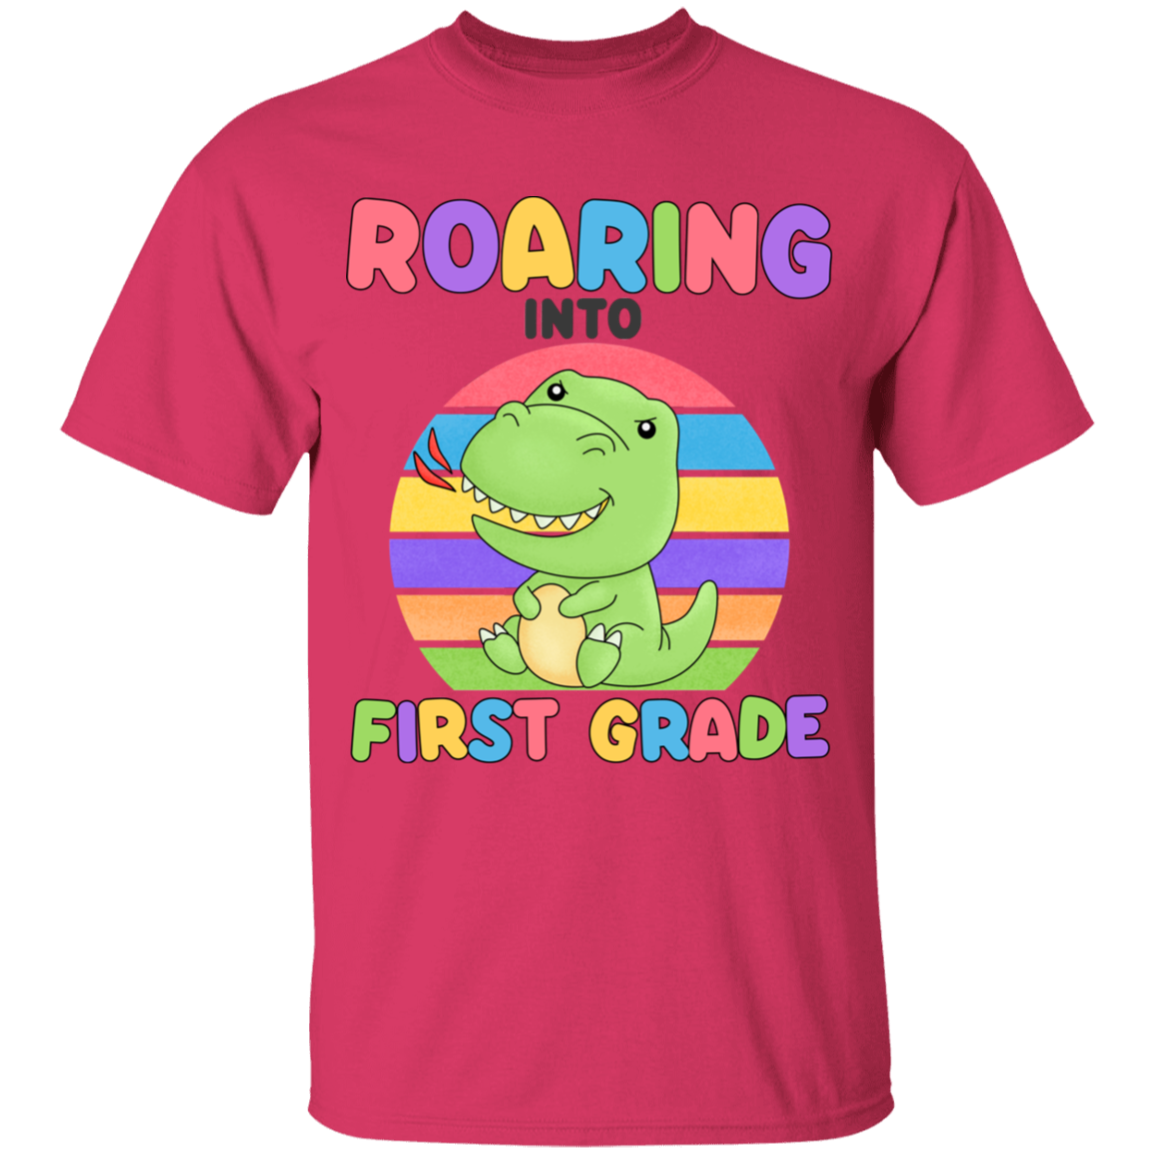 Roaring Into First Grade Youth Cotton T-Shirt